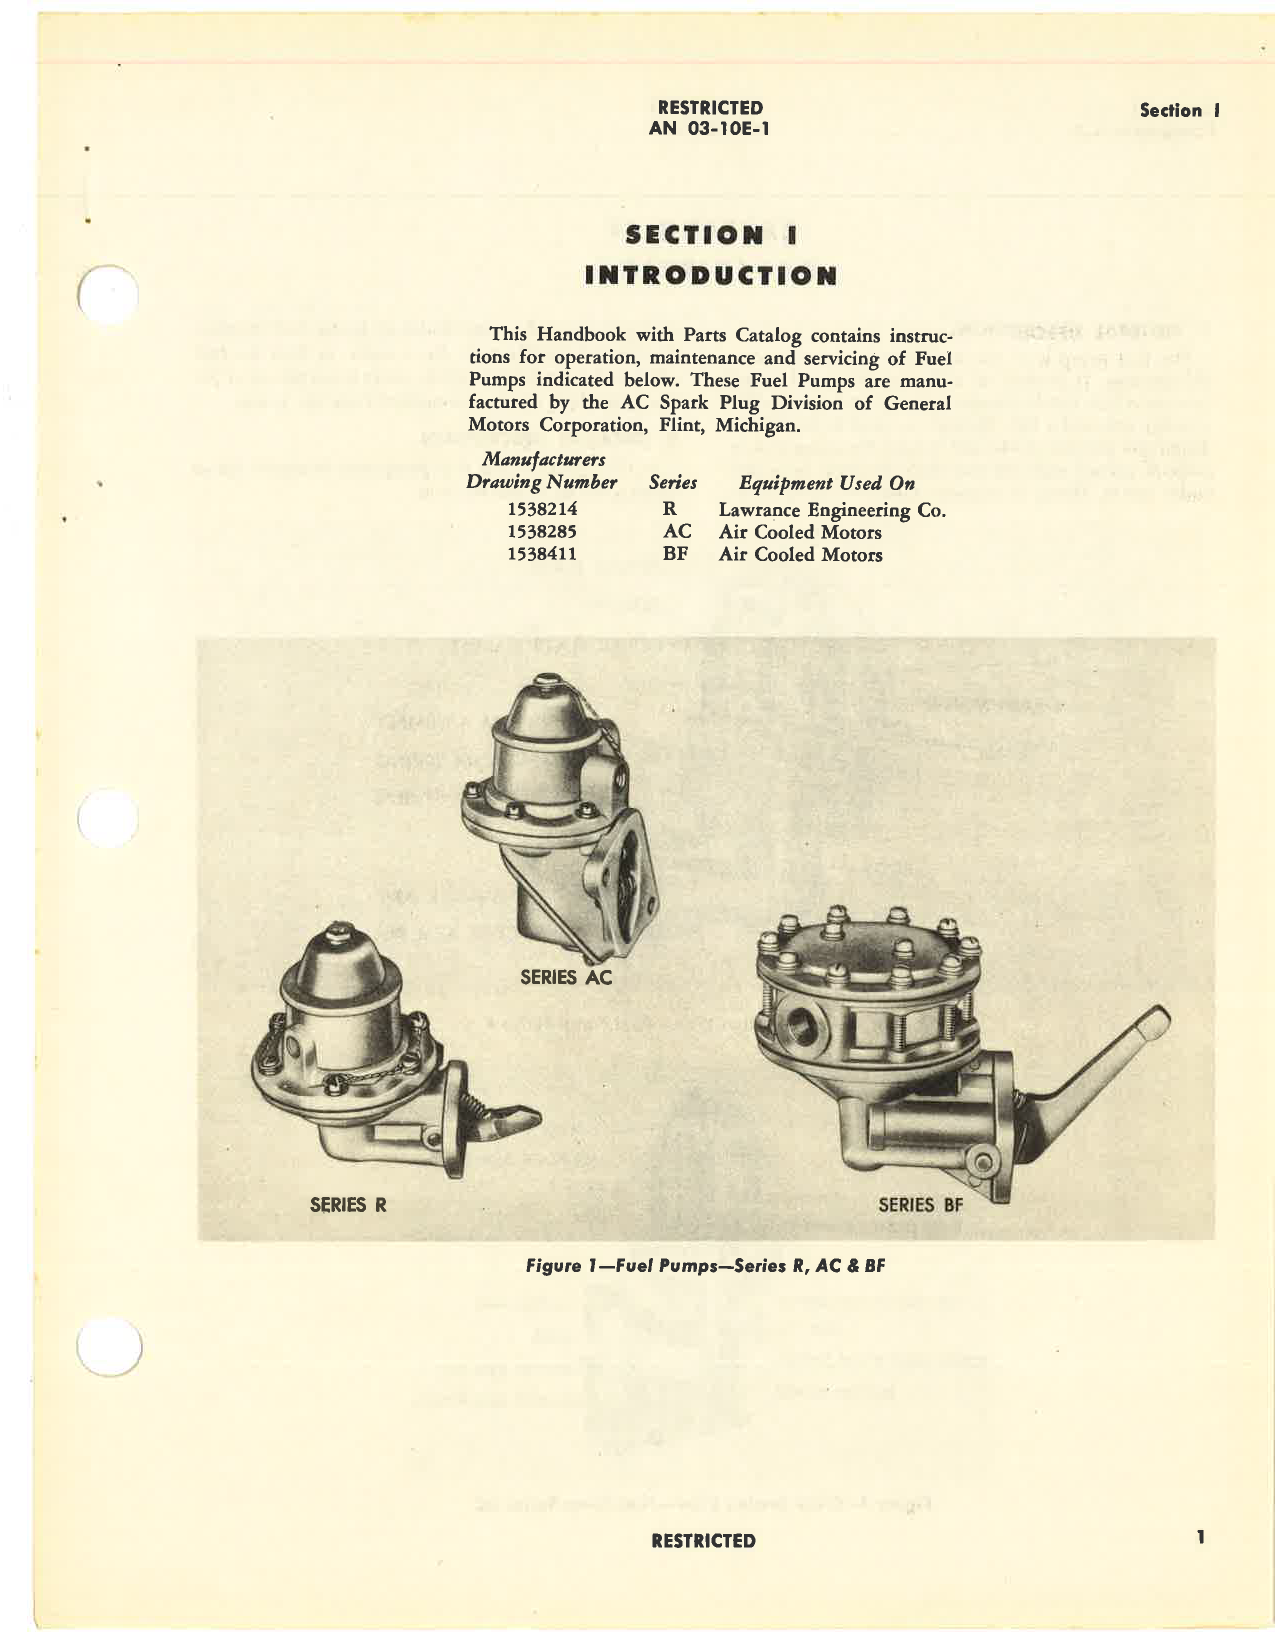 Sample page 5 from AirCorps Library document: Handbook of Instructions with Parts Catalog for Types AC, BF, and R Fuel Pumps